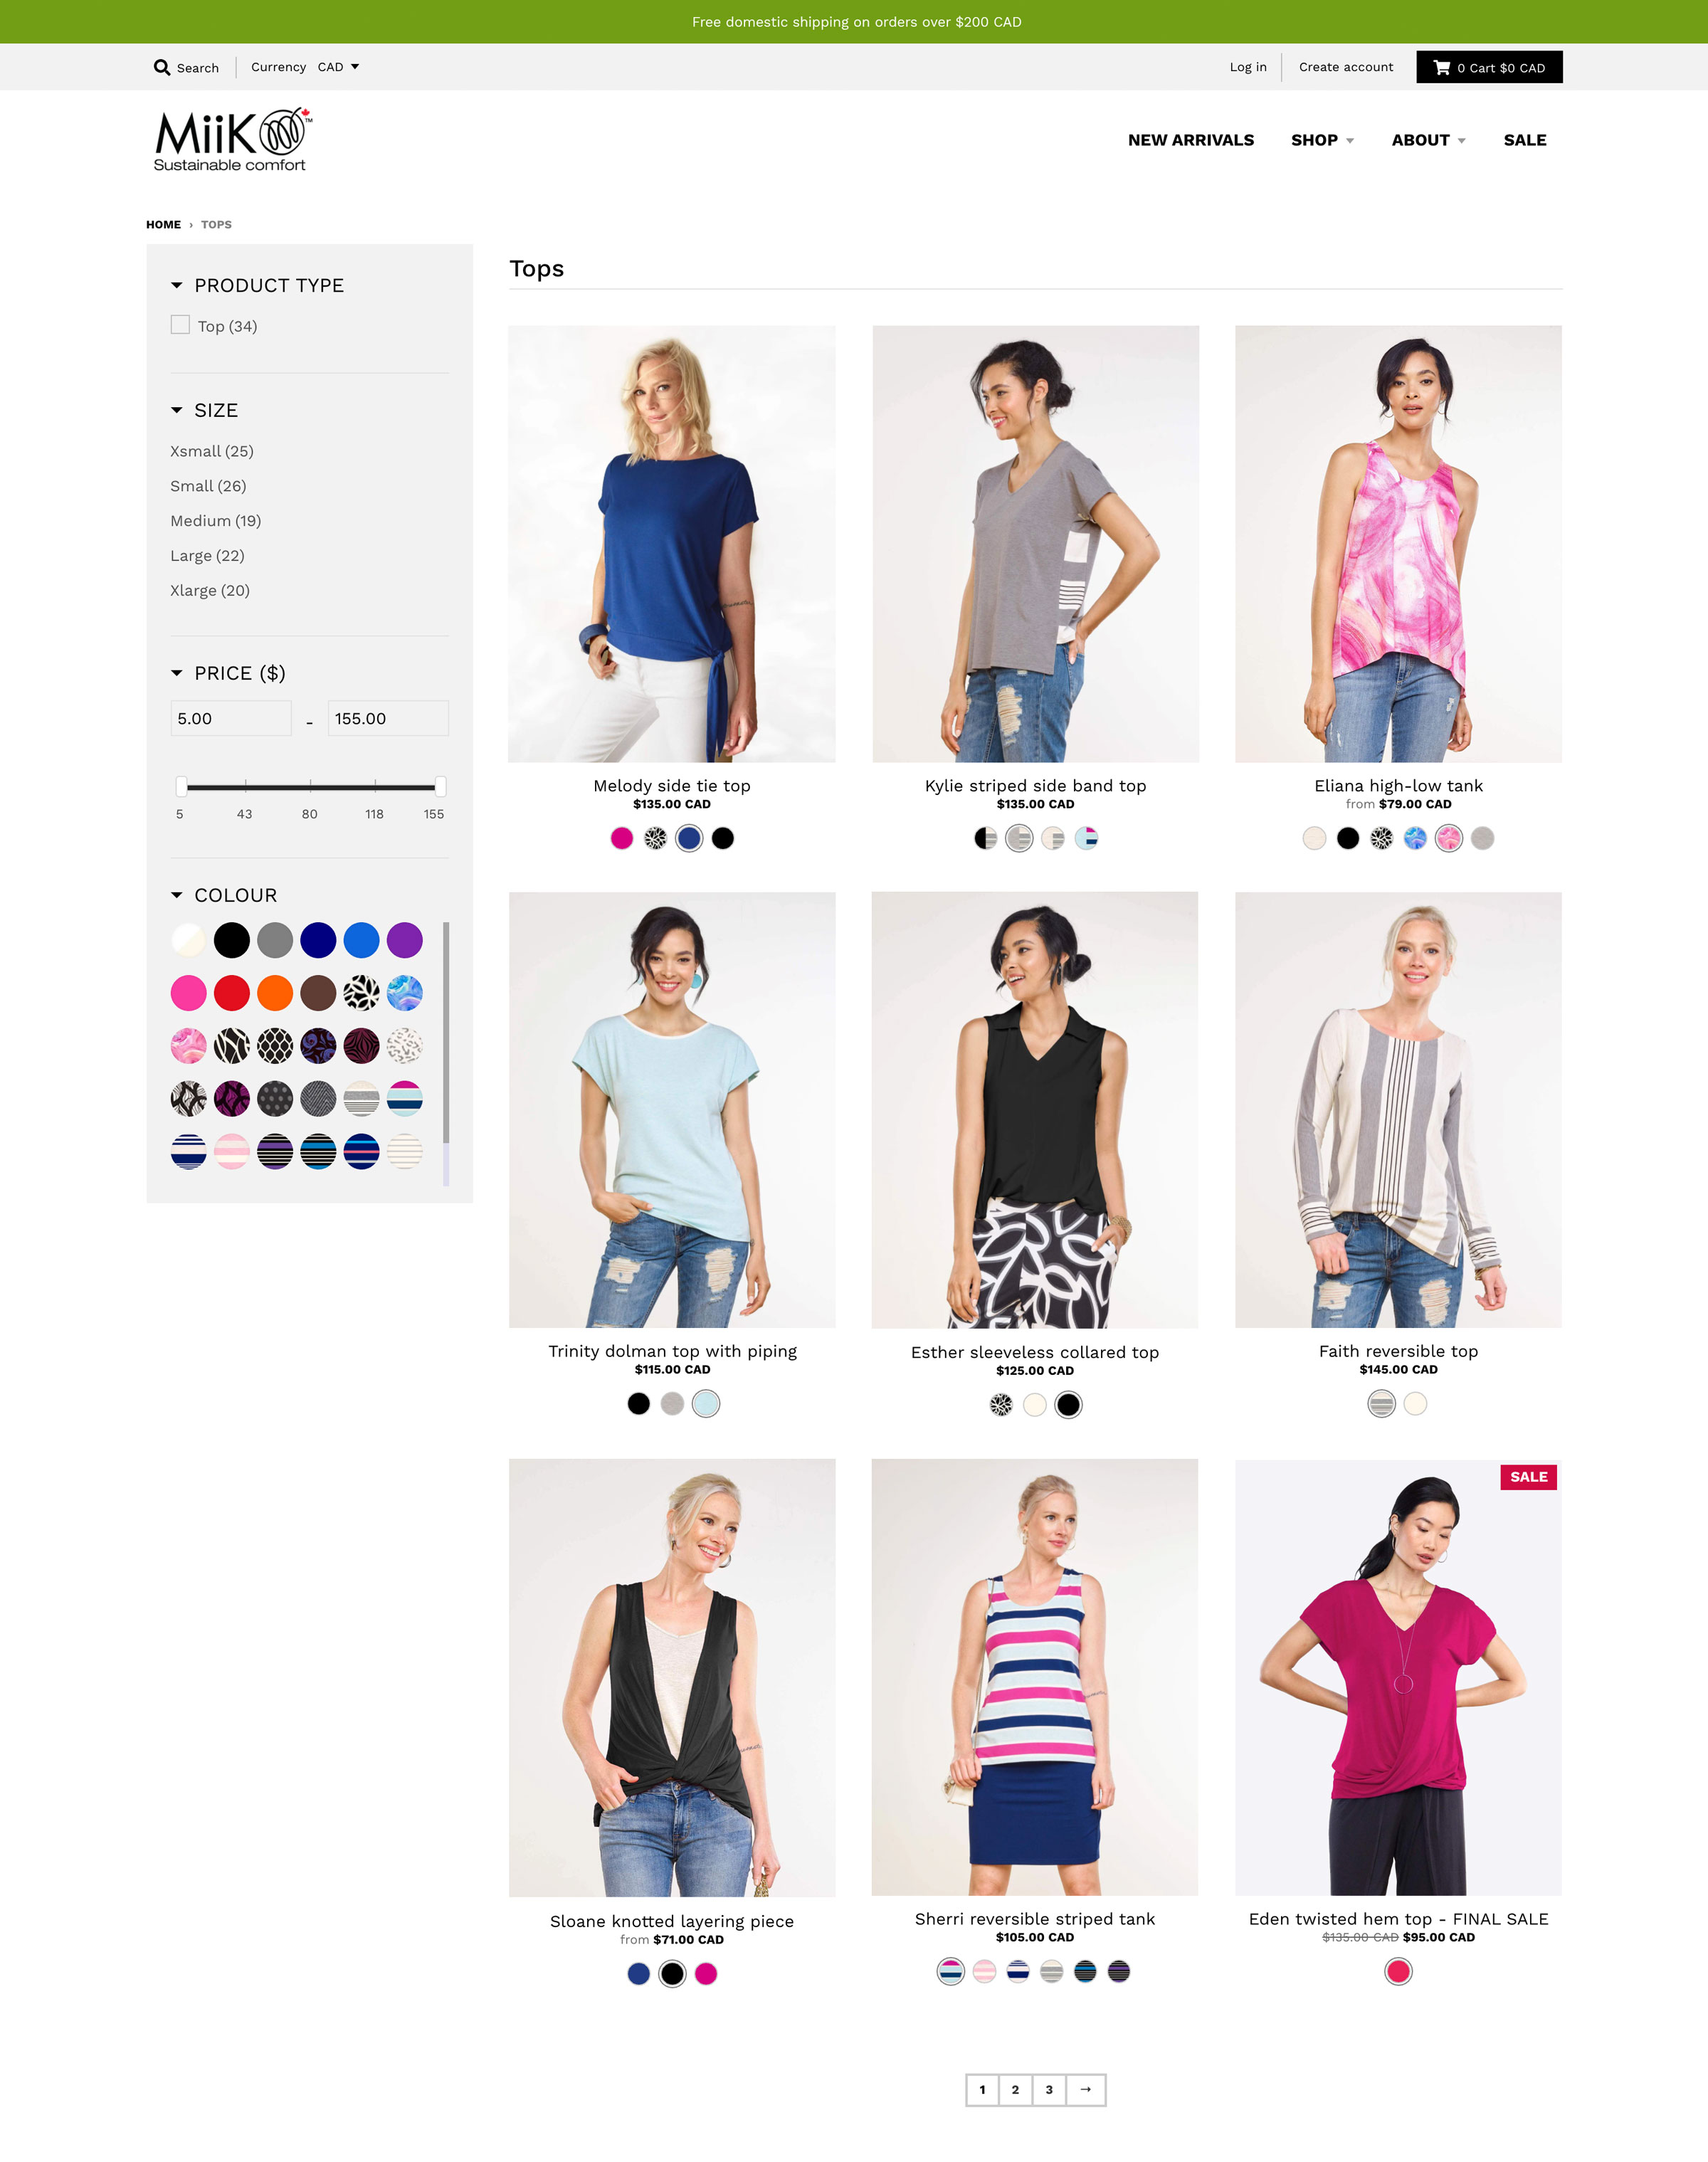 Screenshot of Miik's new website's product collection page. A grid of images is displayed on the right with a sophisticated search filter section to its left.